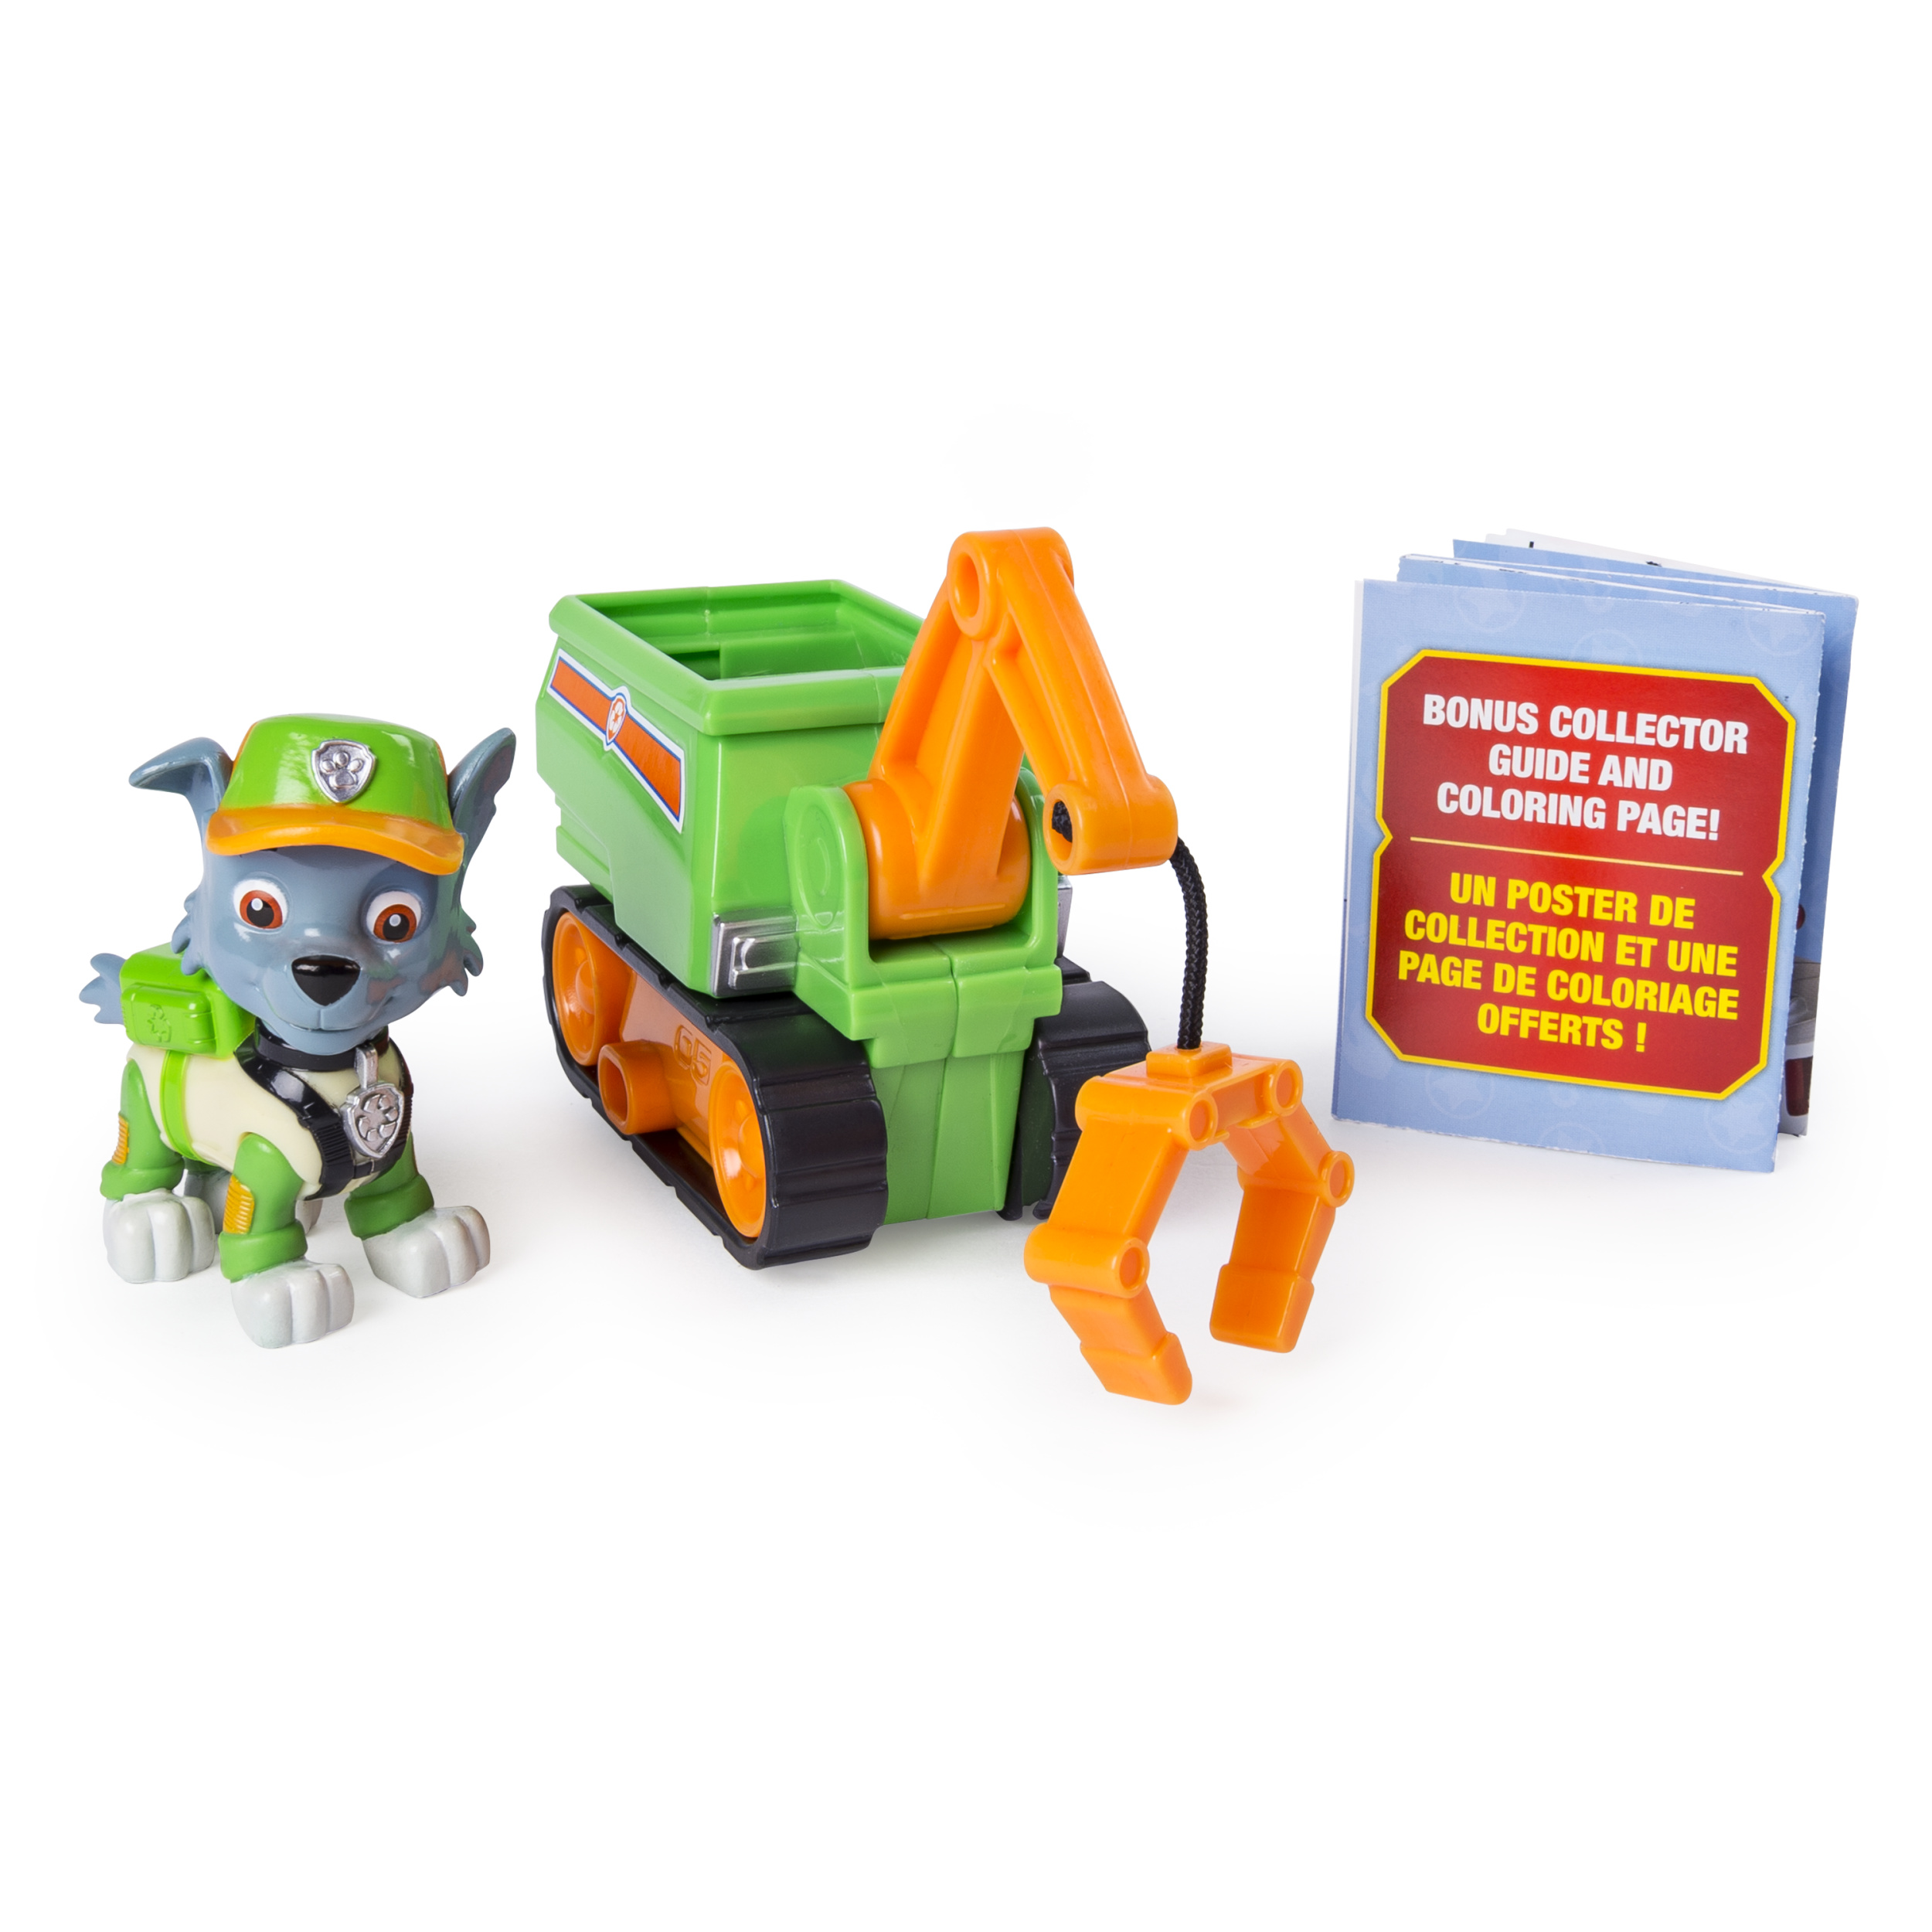 PAW Patrol Ultimate Rescue, Rocky’s Mini Crane Cart with Collectible Figure for Ages 3 and Up - image 1 of 6